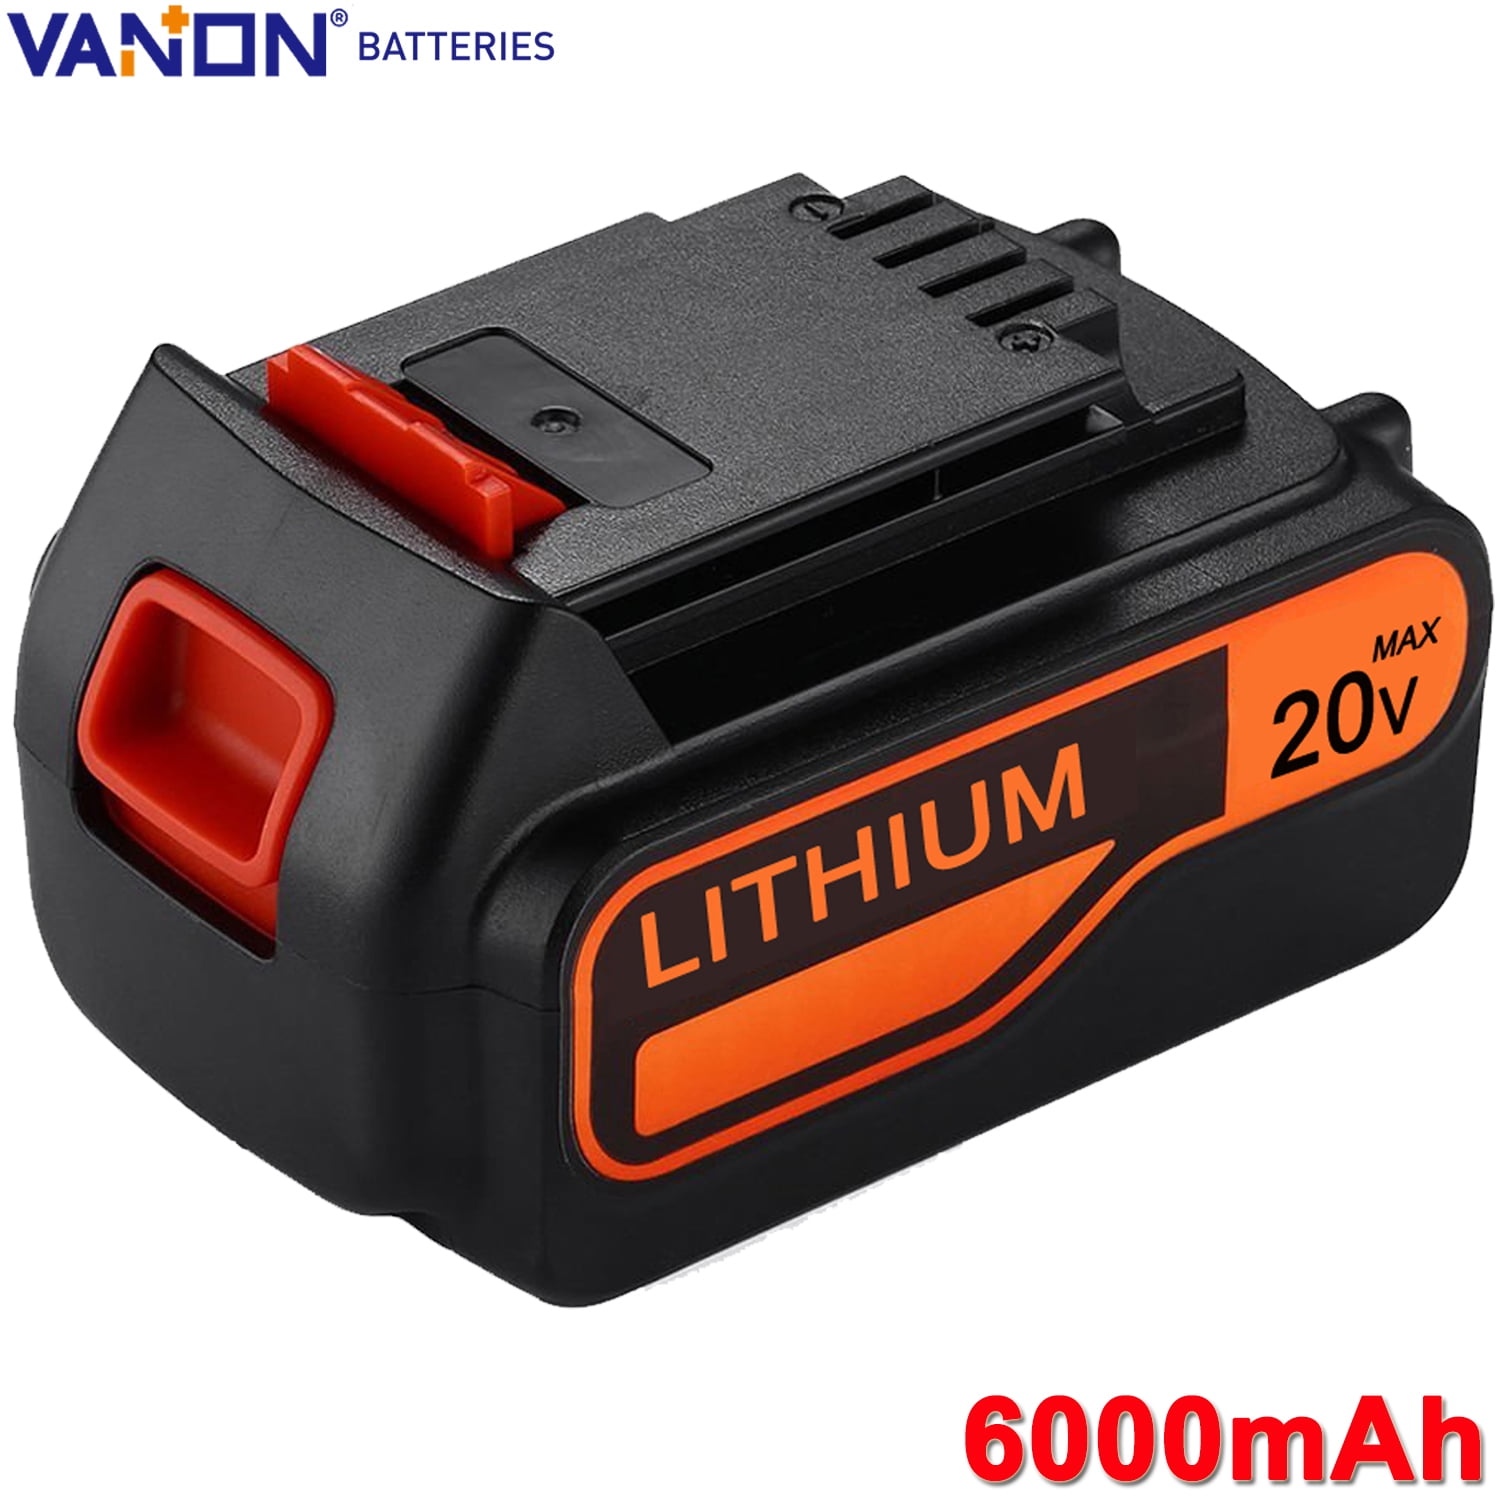 VANON Replacement for Black and Decker 40V Lithium Max Battery 4.0Ah LBXR36  LBX2040 LBXR2036 LST540 LCS1240 LBX1540 LST136W,2-Pack